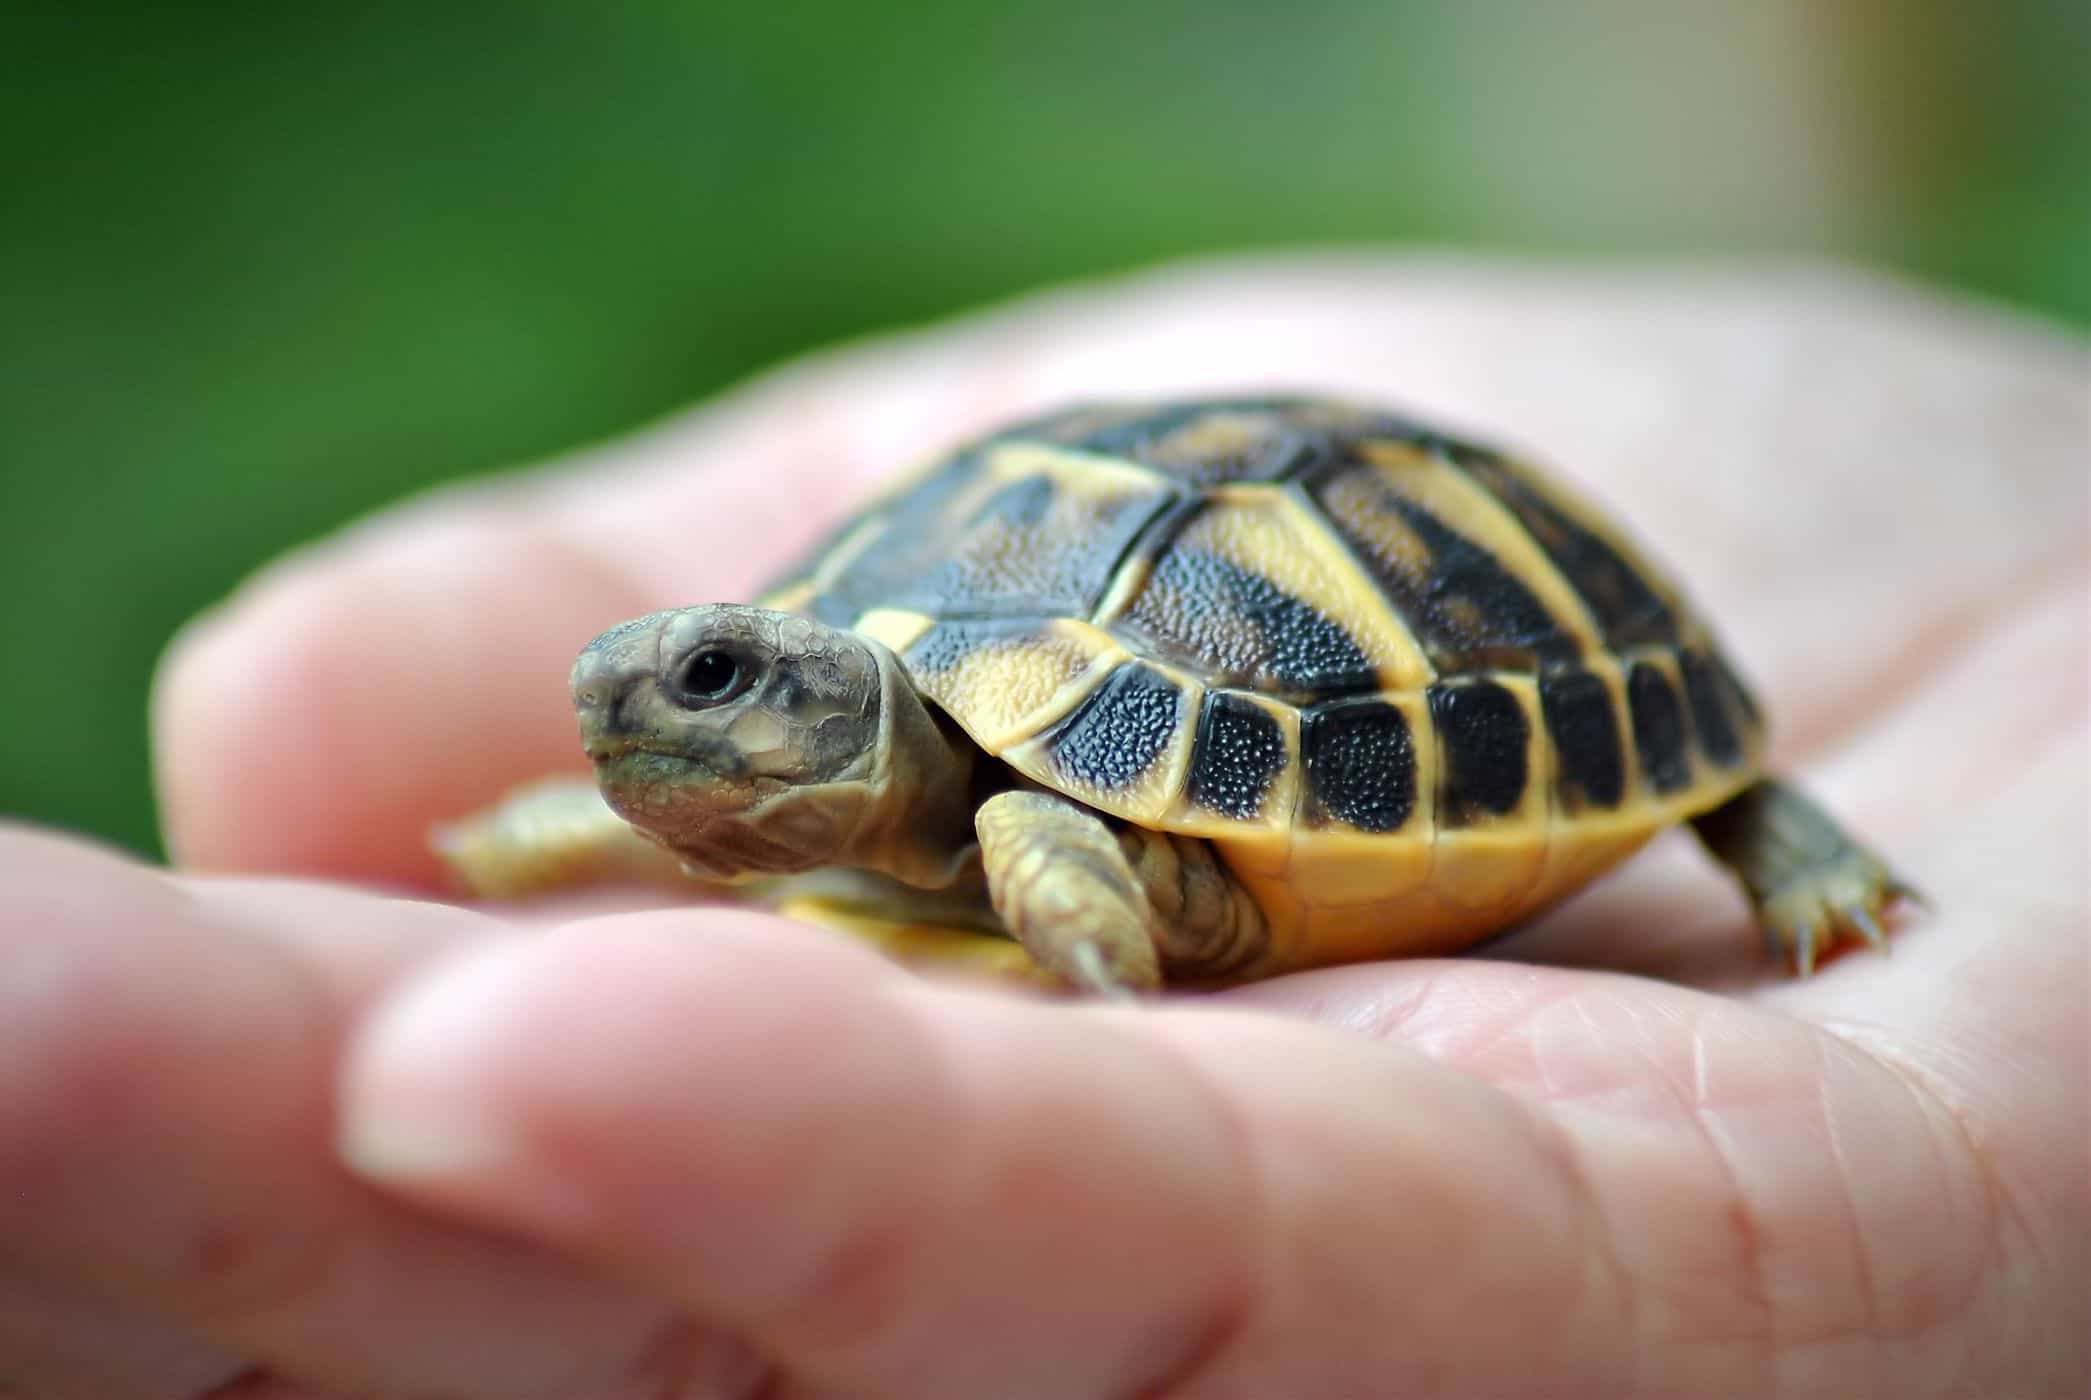 maintaining turtles increases the risk of salmonella infection